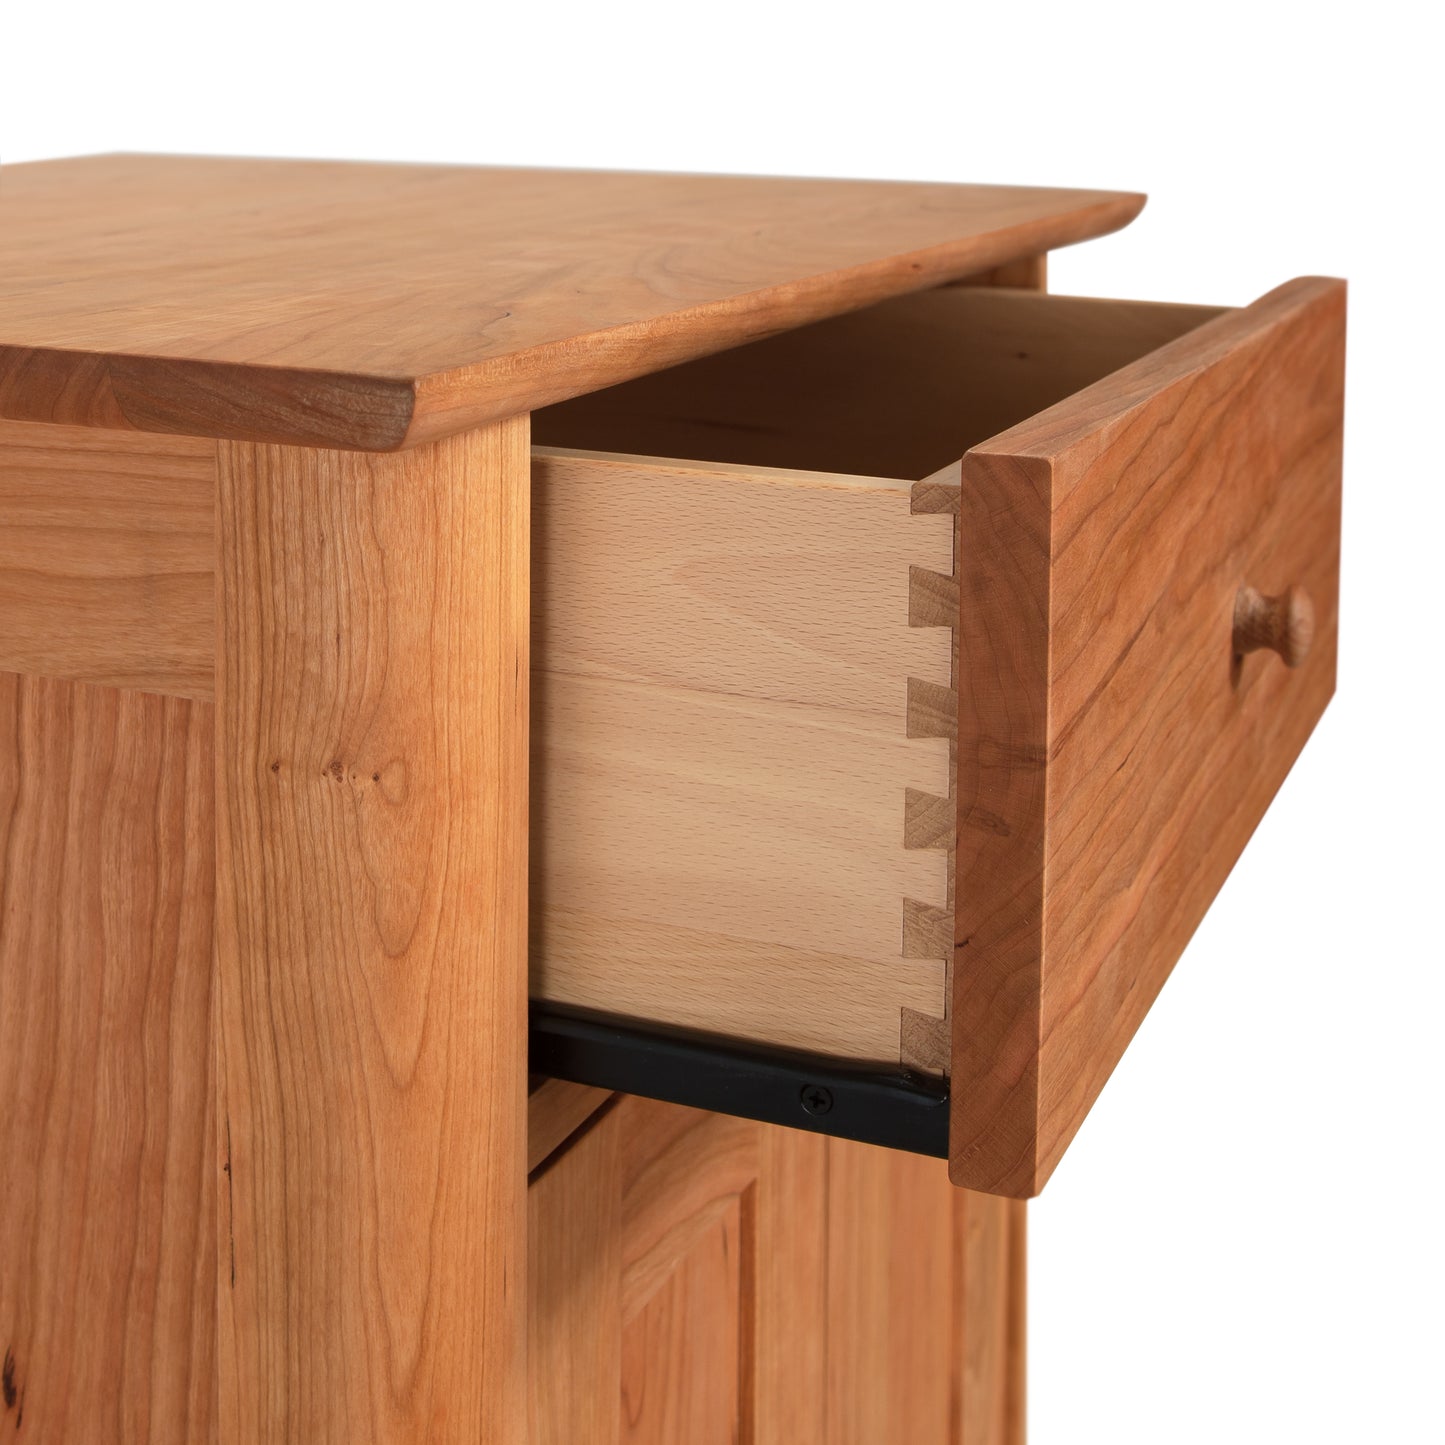 A wooden nightstand with a drawer.